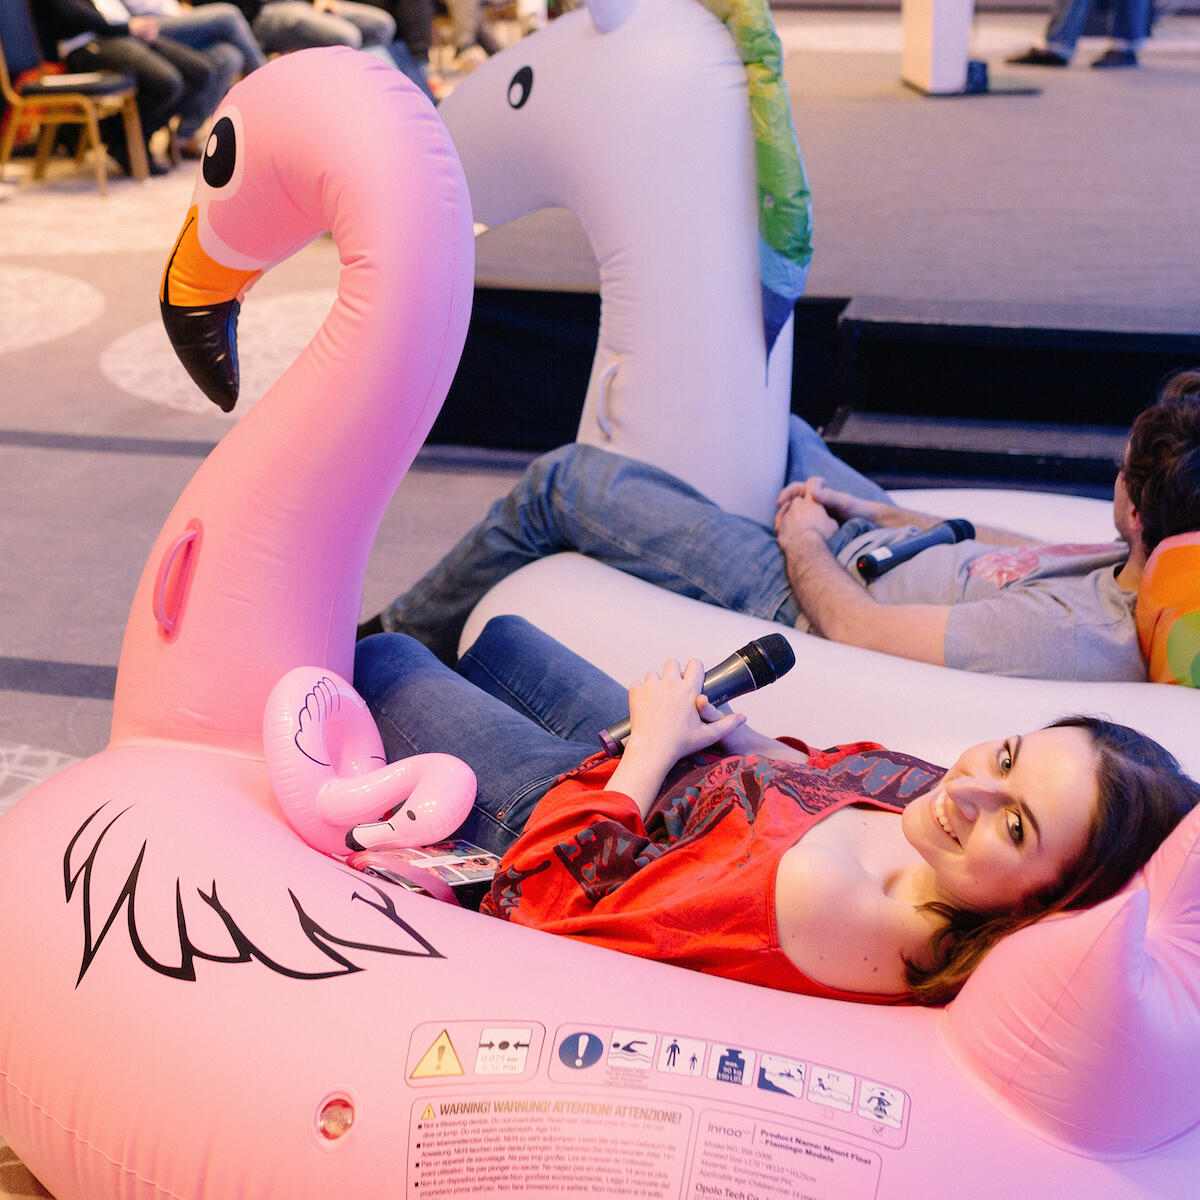 Image of a Thoughtworker in Germany, working on a giant flamingo